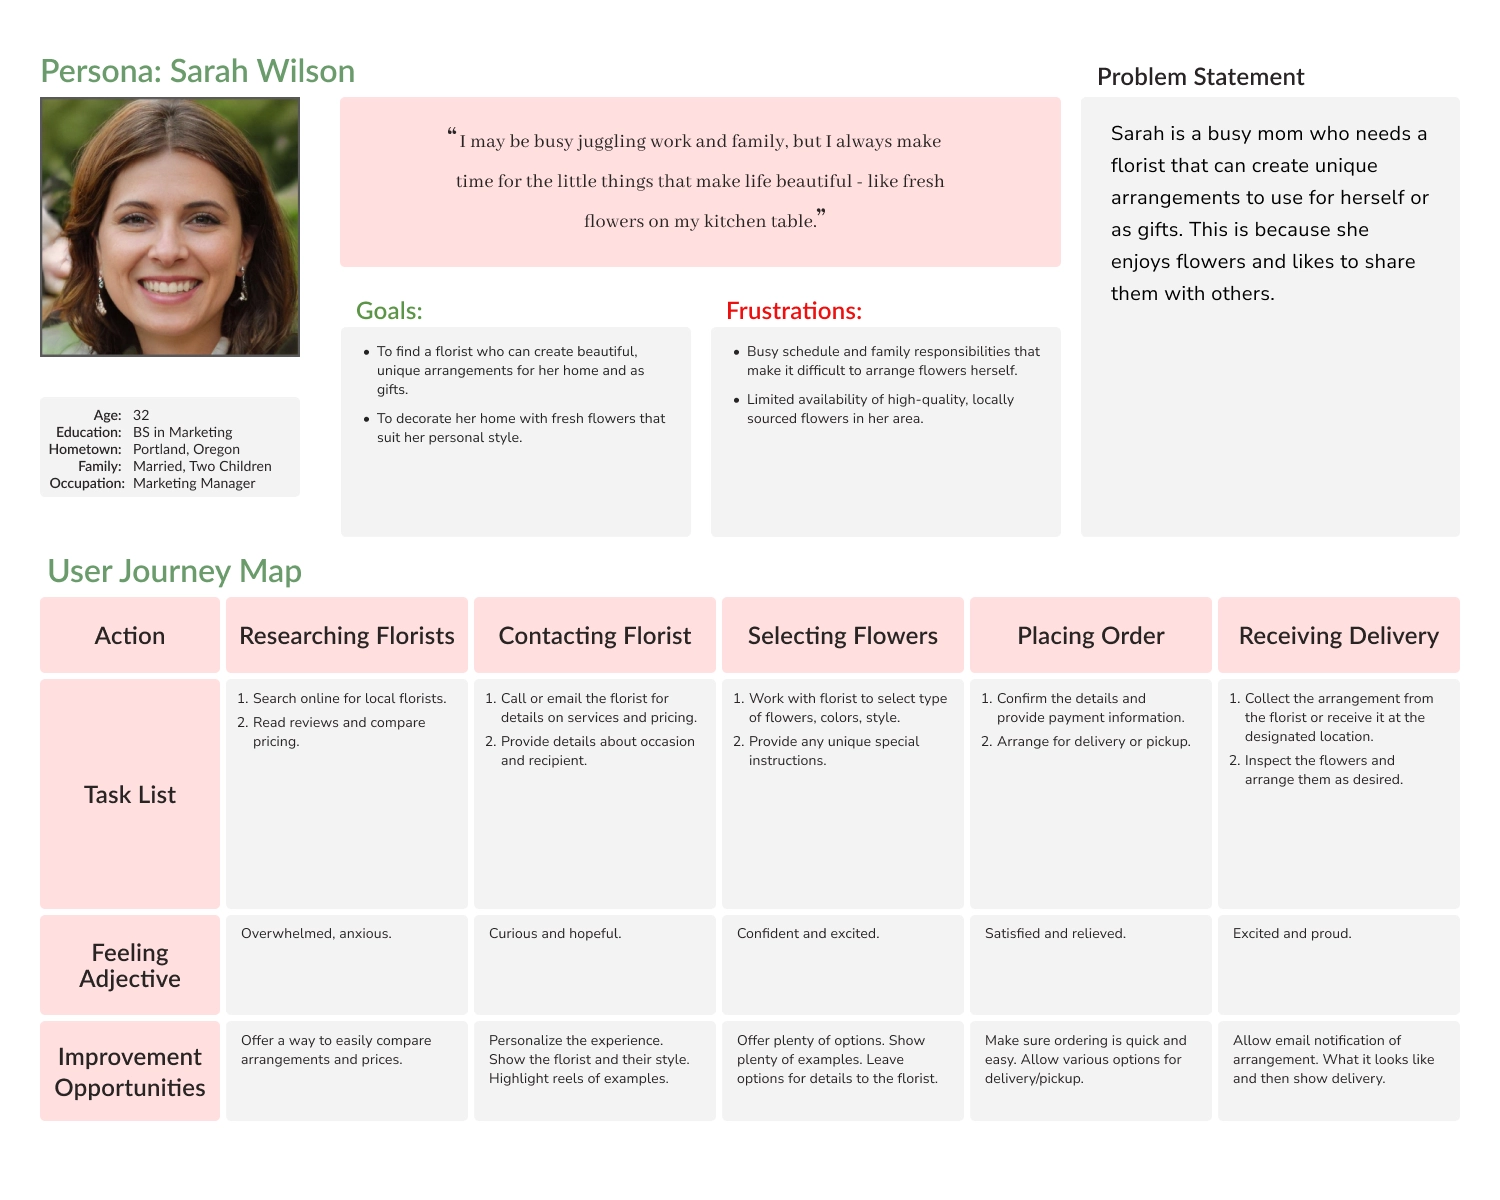 Personas and Journey Maps